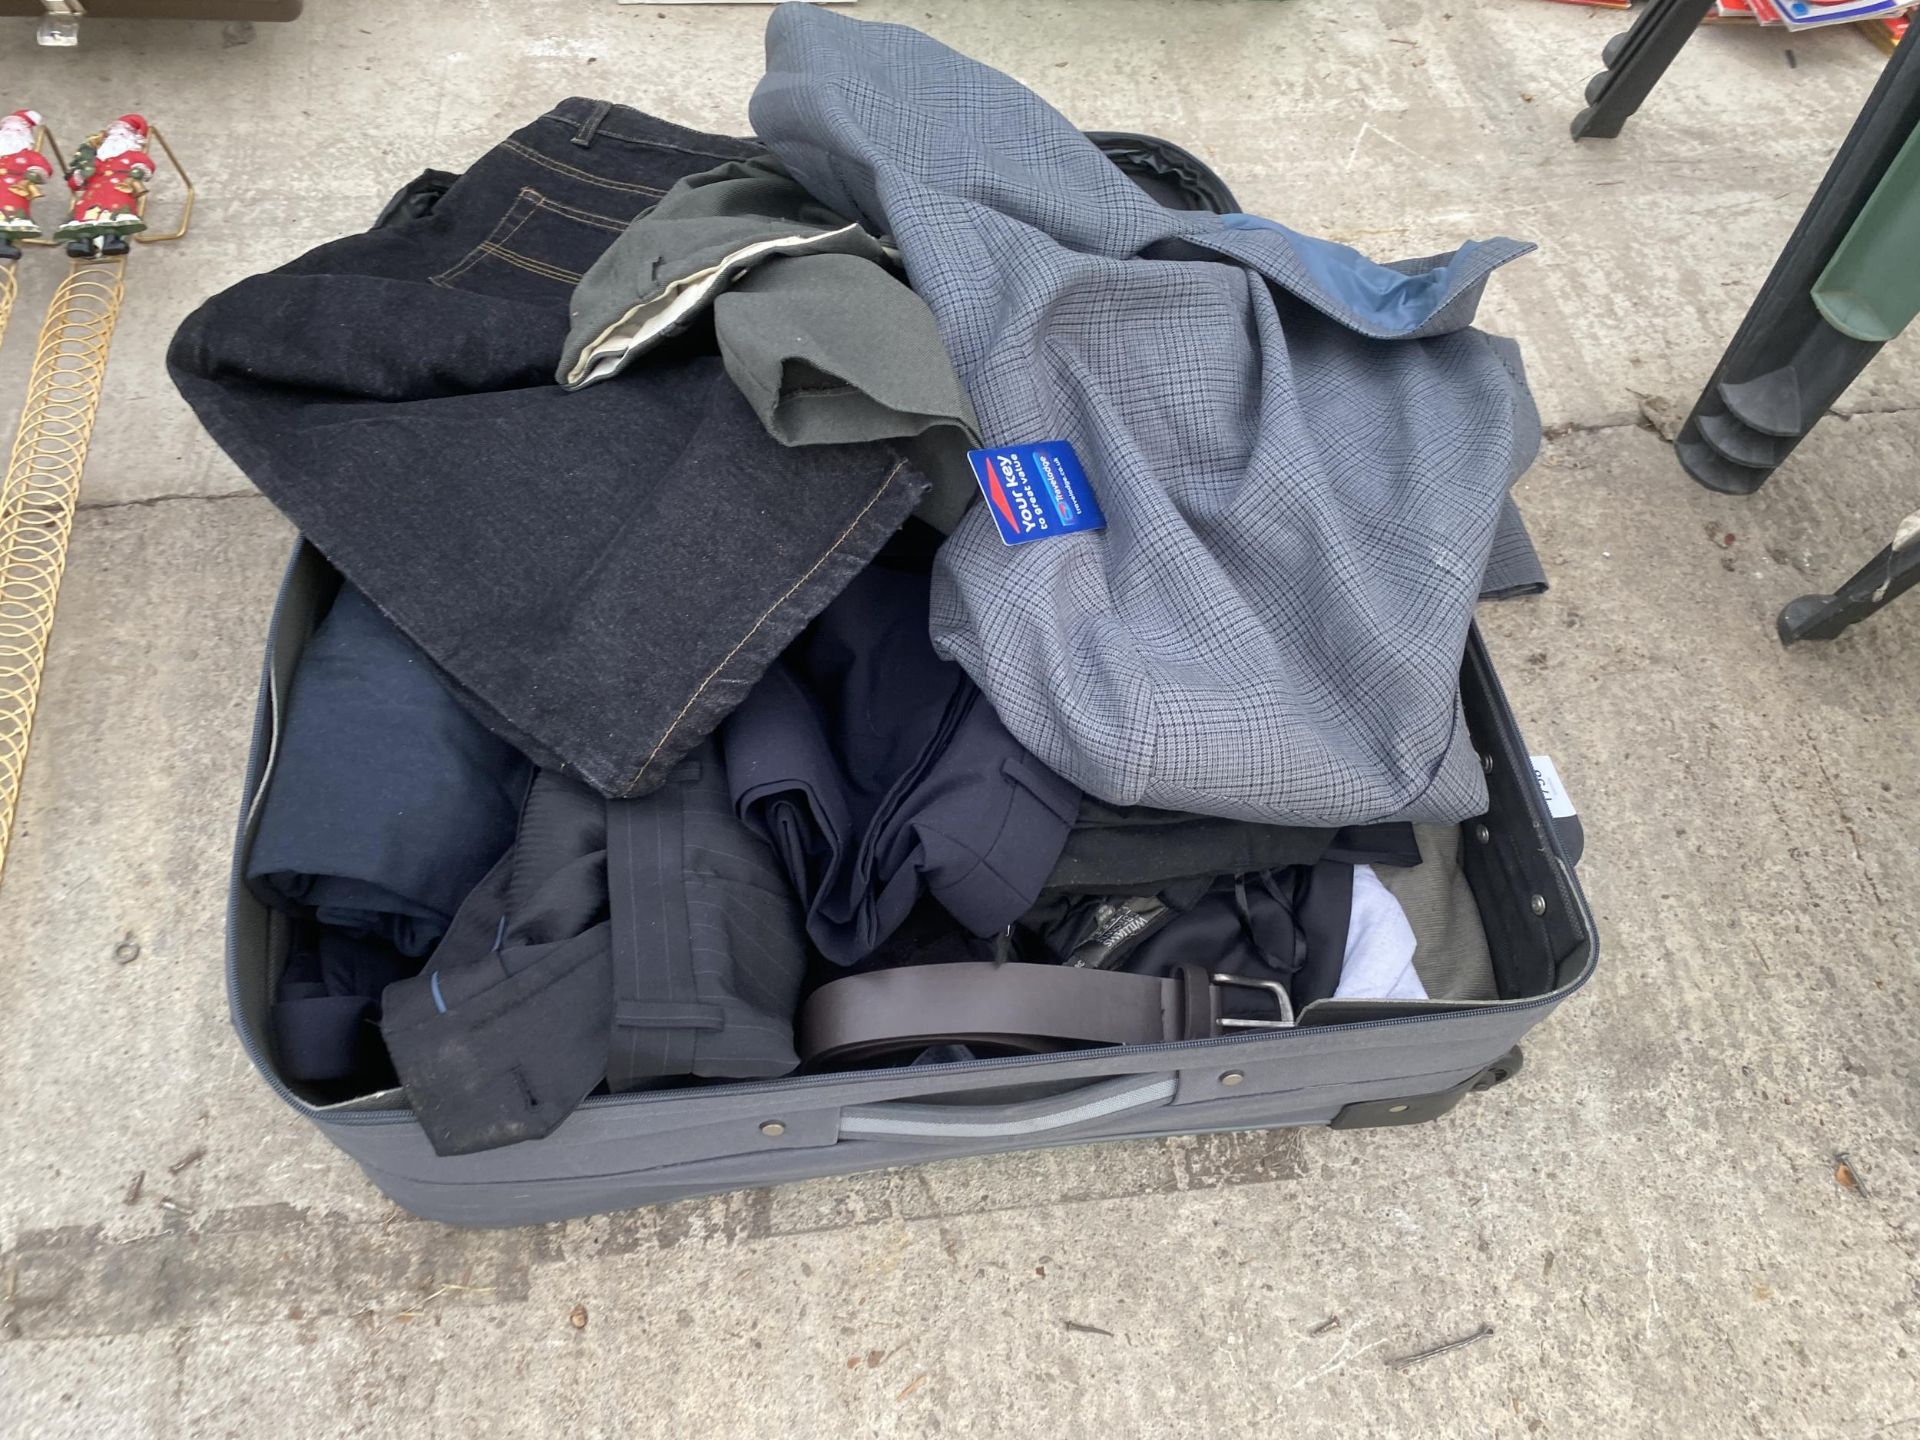 A SUITCASE CONTAINING AN ASSORTMENT OF CLOTHING